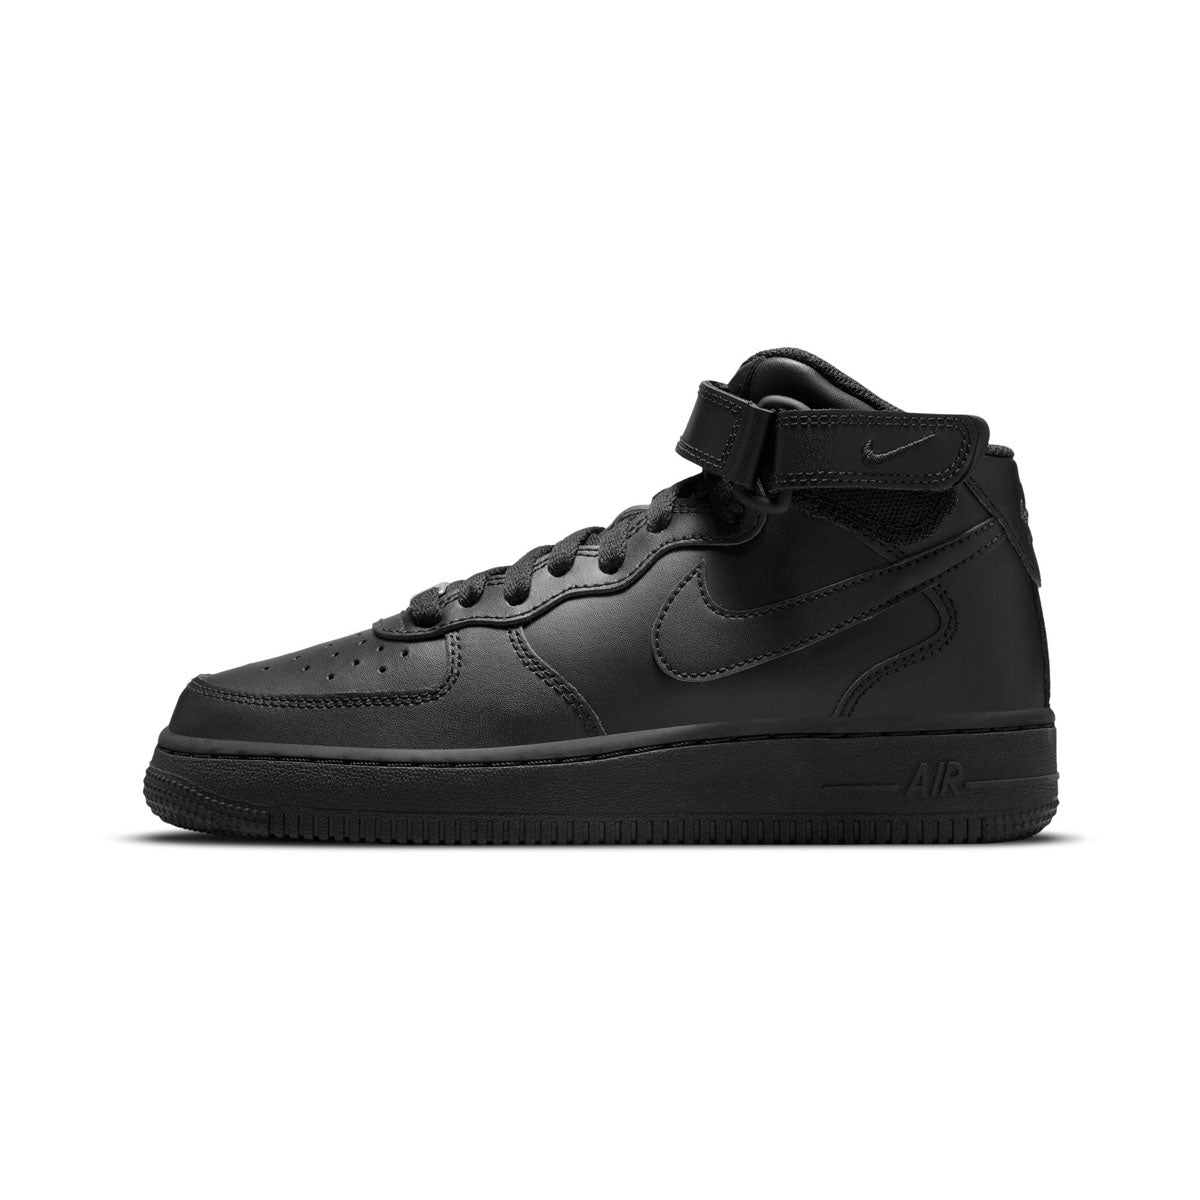 Nike Air Force 1 Mid LE ﻿Big Kids' Shoes